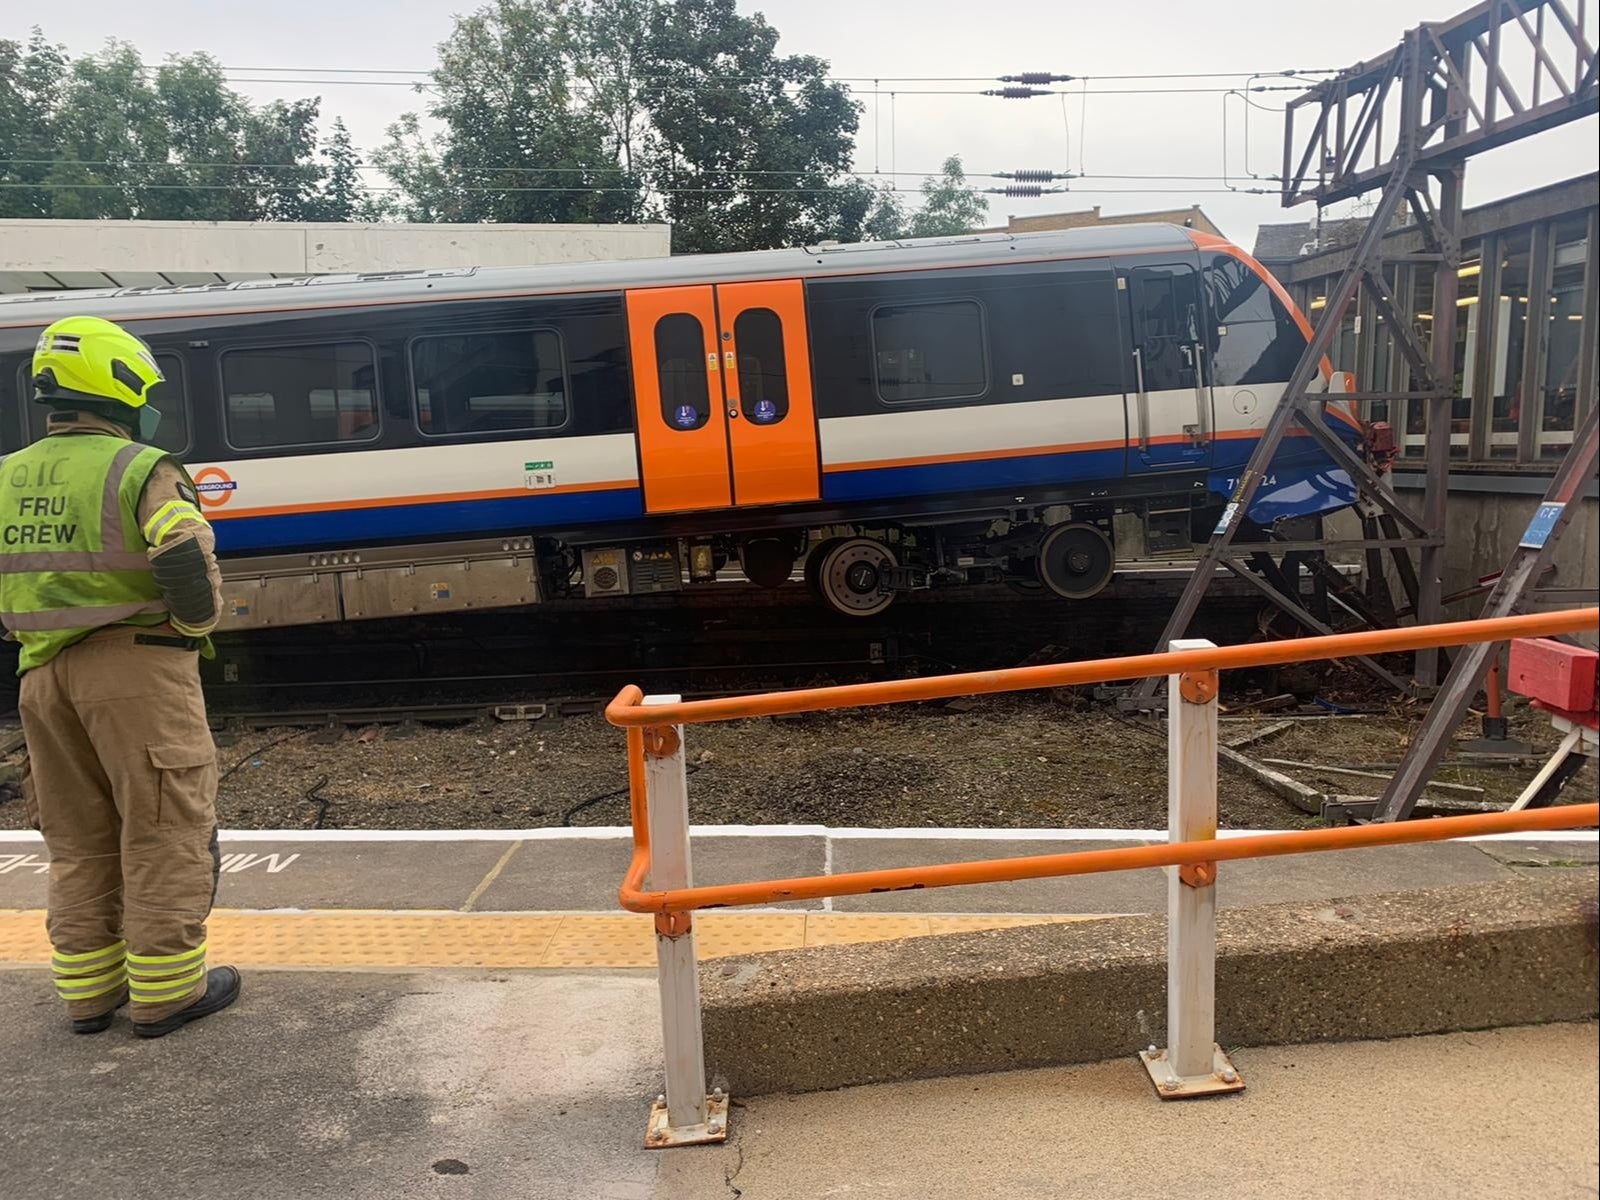 Two people have been treated for minor injuries after an eight-carriage London Overground train crashed into buffers at Enfield Town station, causing it to derail.